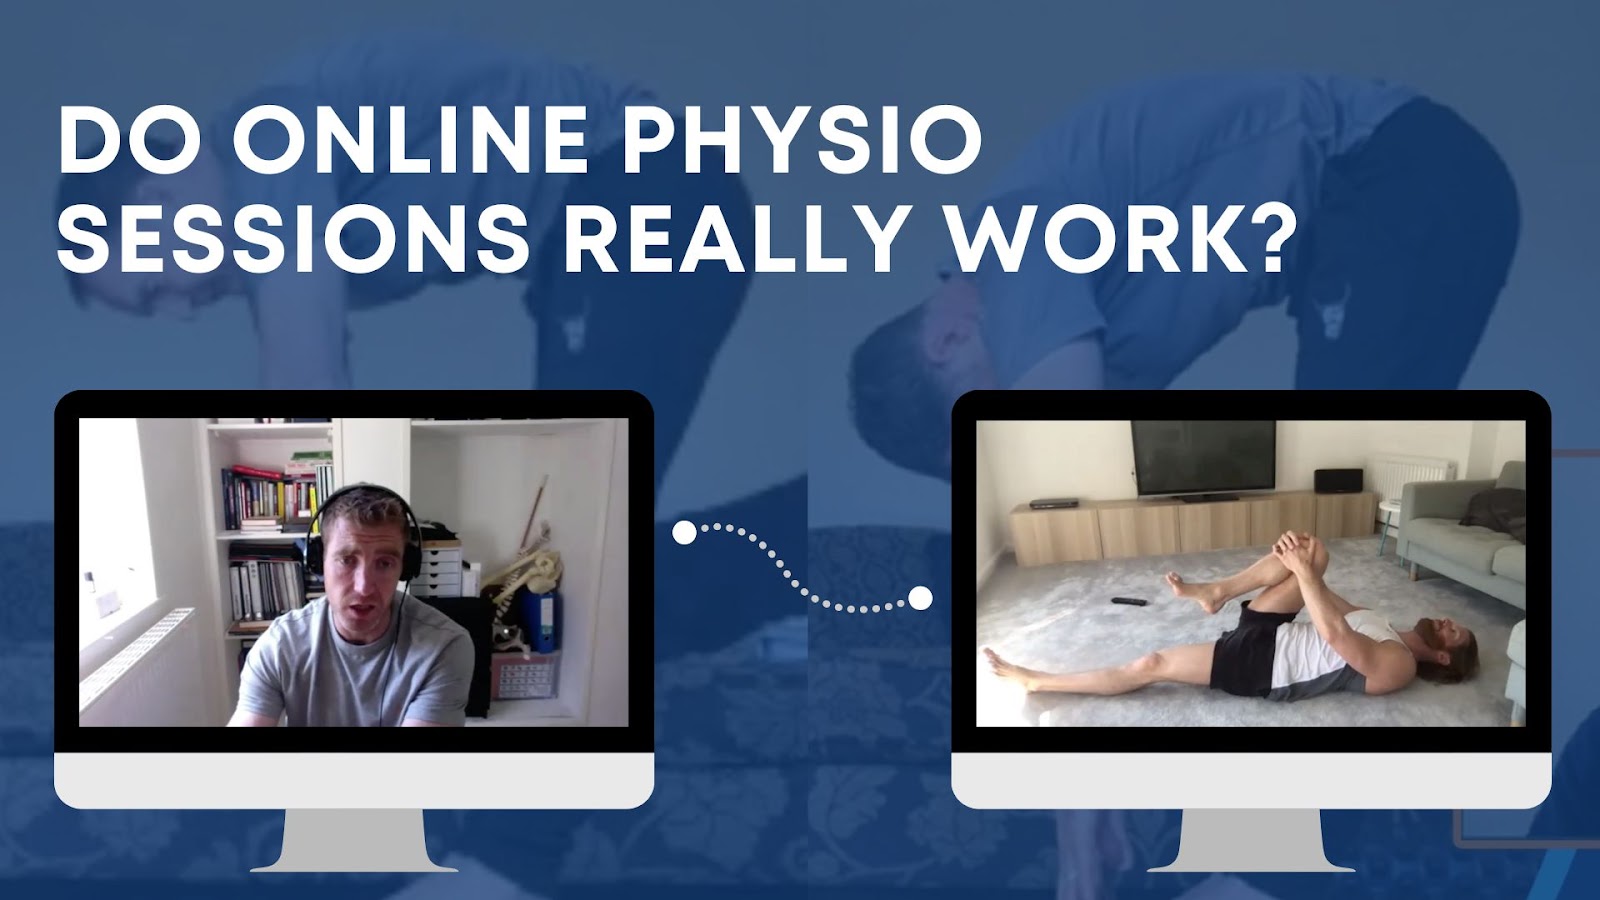 Do Online Physio Sessions Really Work?